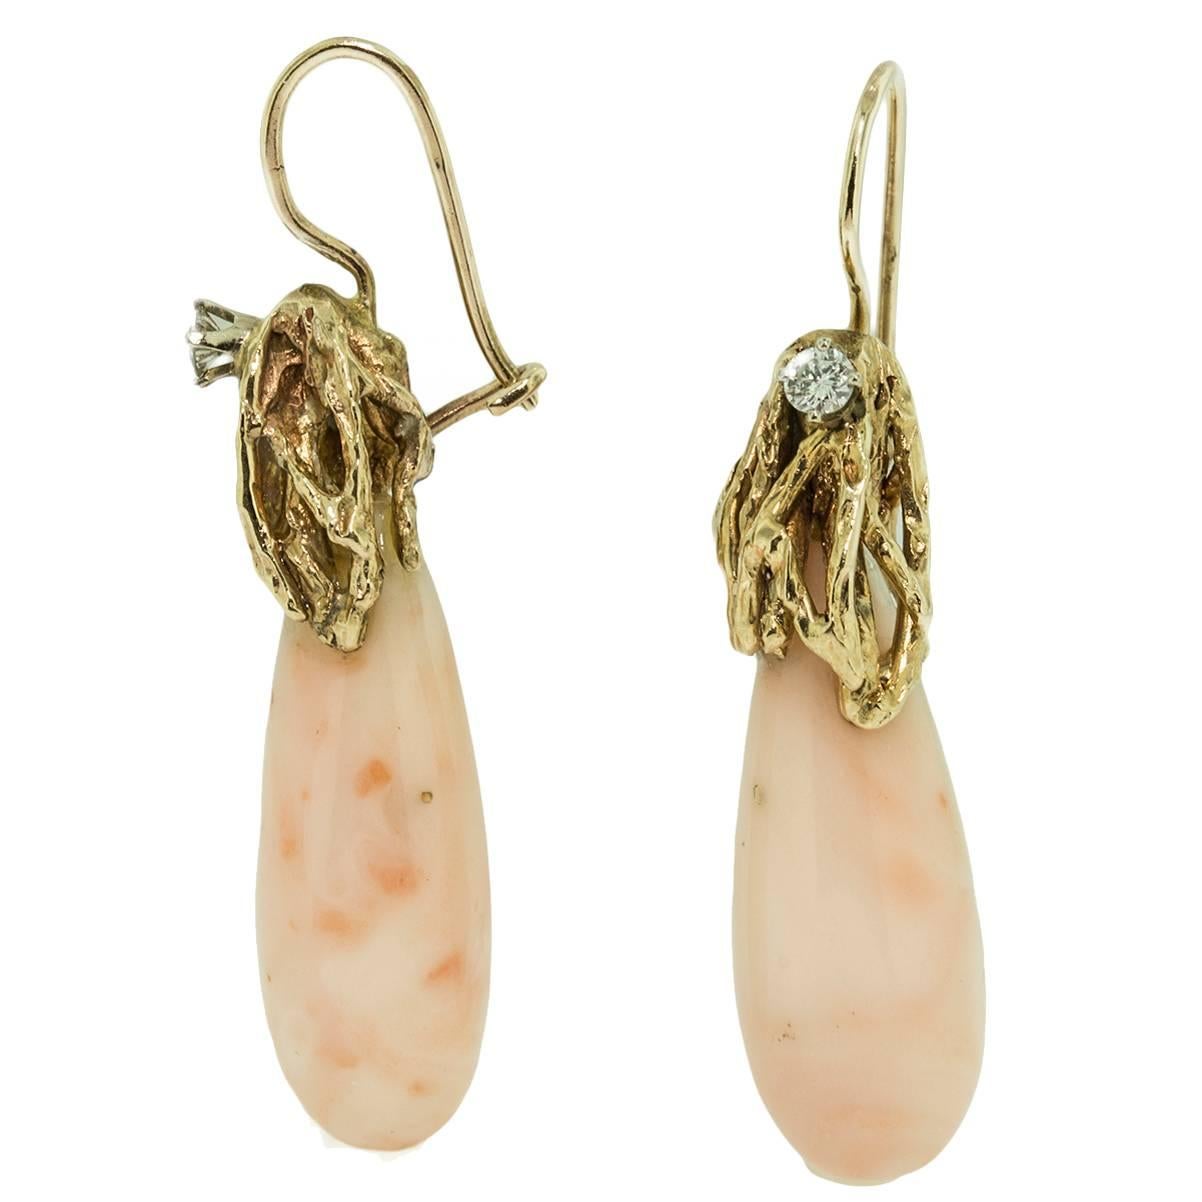 These charming earrings are set in 14kt yellow gold. Each earring is embellished by a tiny .05 diamond. The gold work is  free form and designed as  naturalistic looking coral. The colour variations are naturally occurring within the coral.The